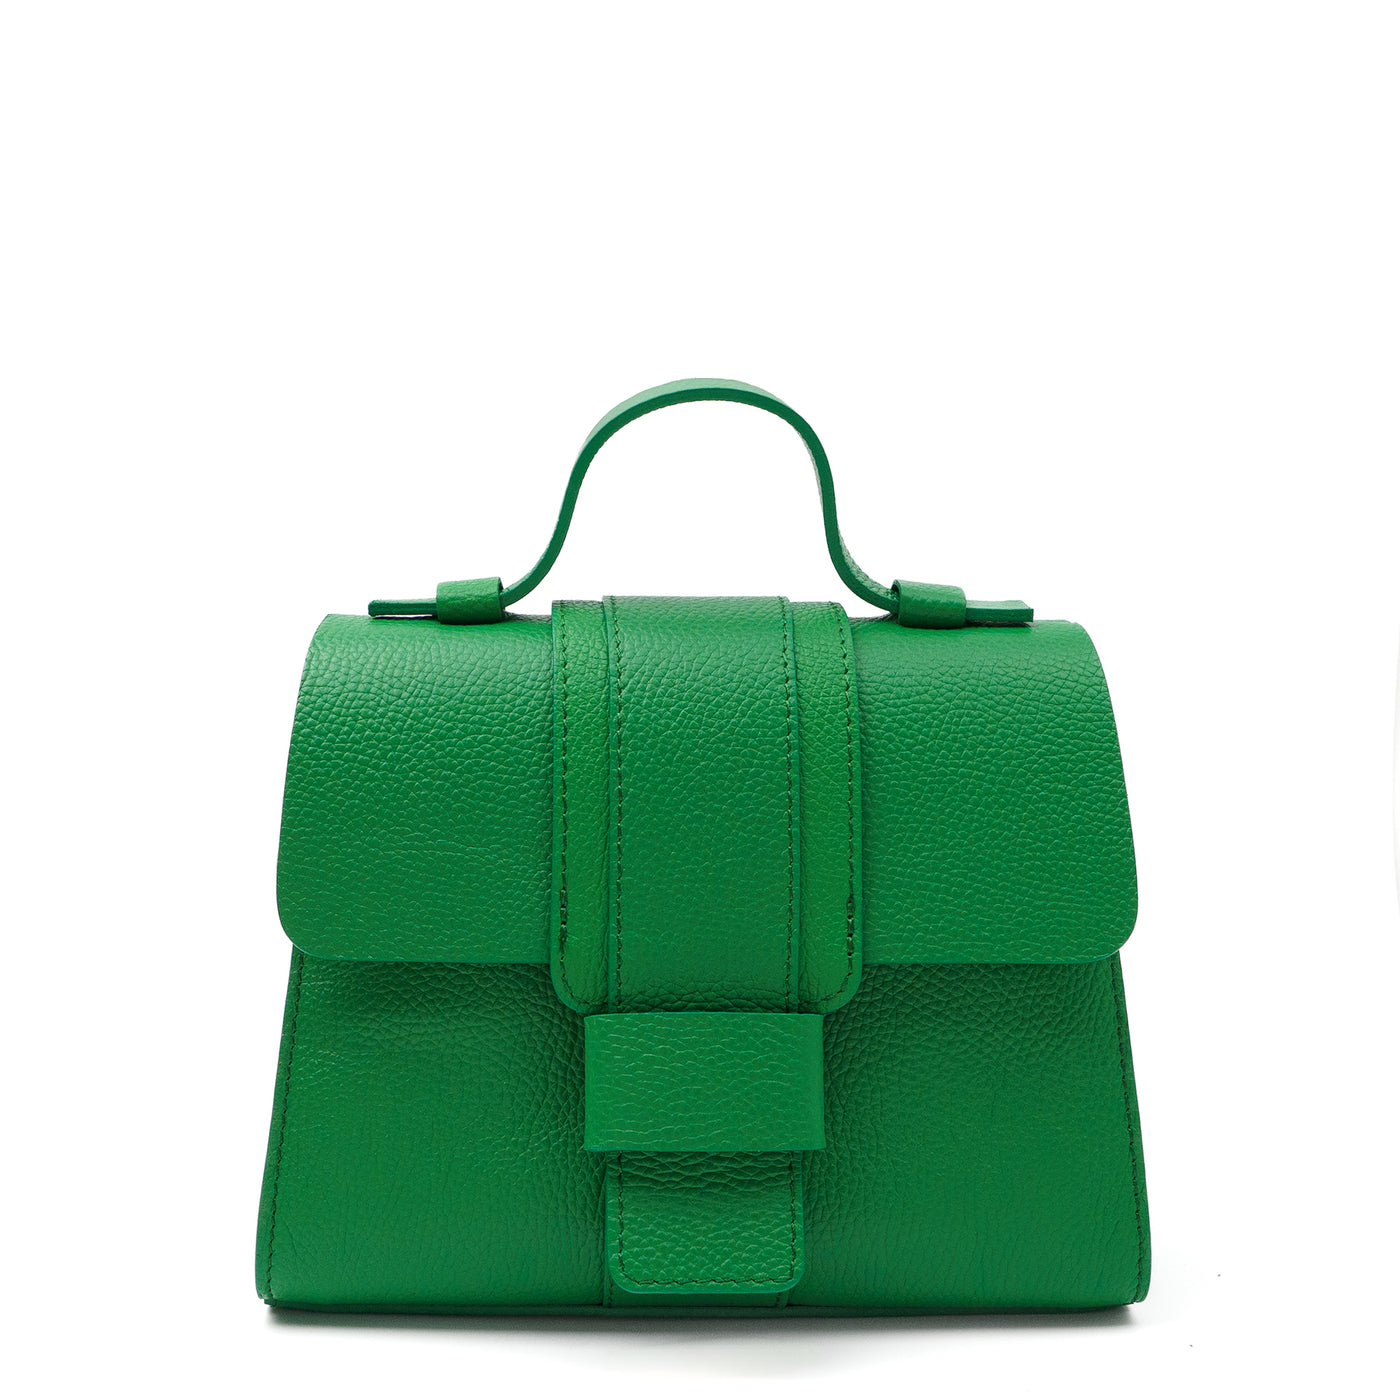 Leather bag "Parma" Green